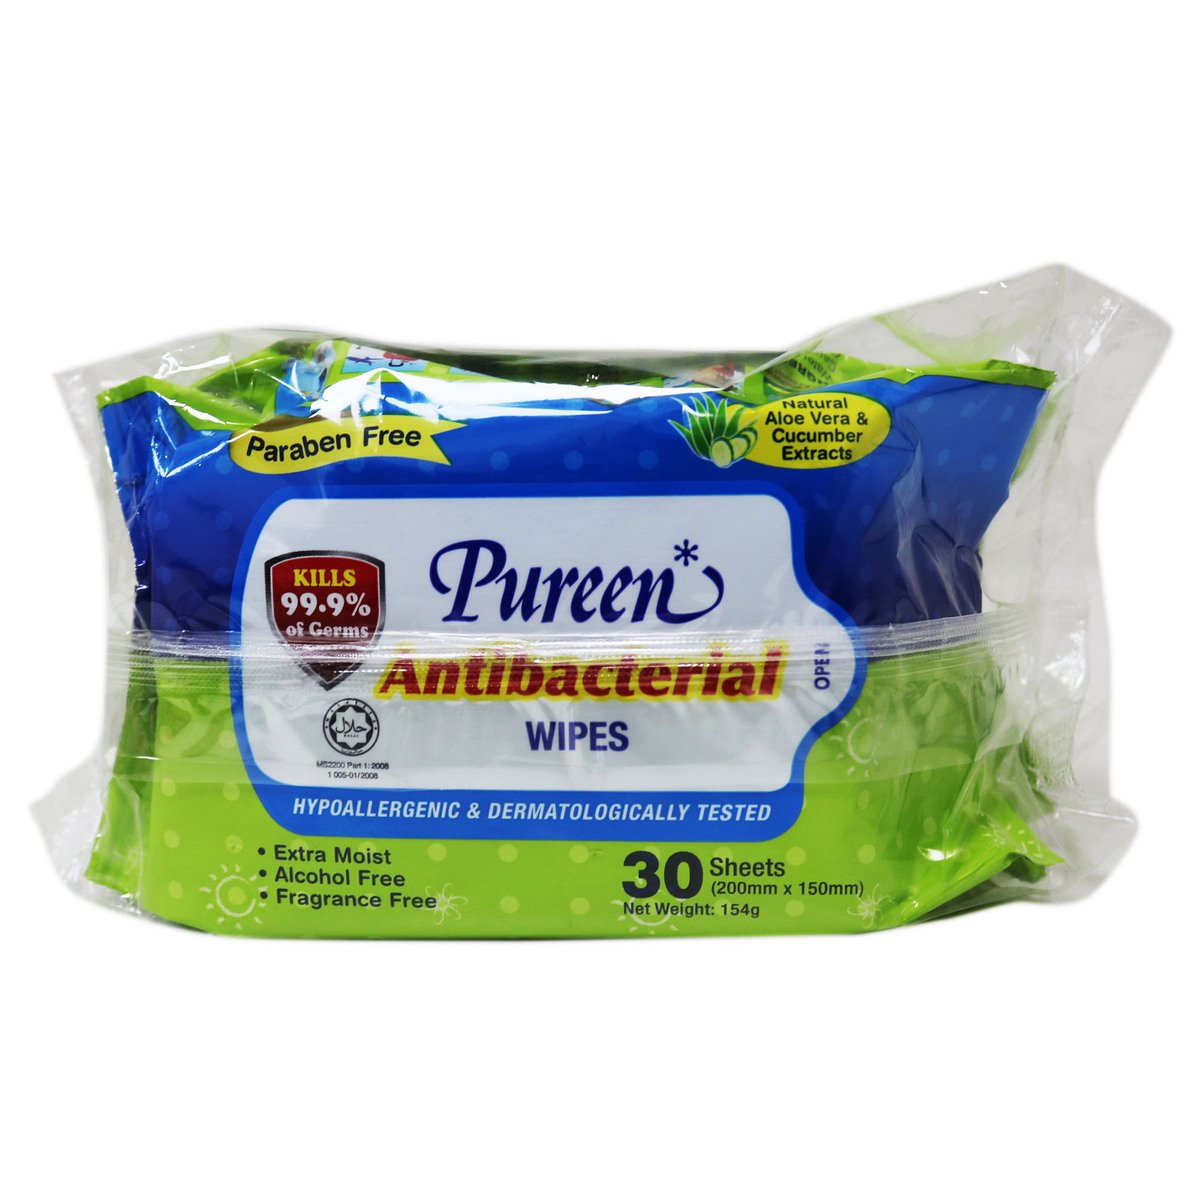 Pureen Antibacterial Wipes Fragrance Free 2 x 30sheets